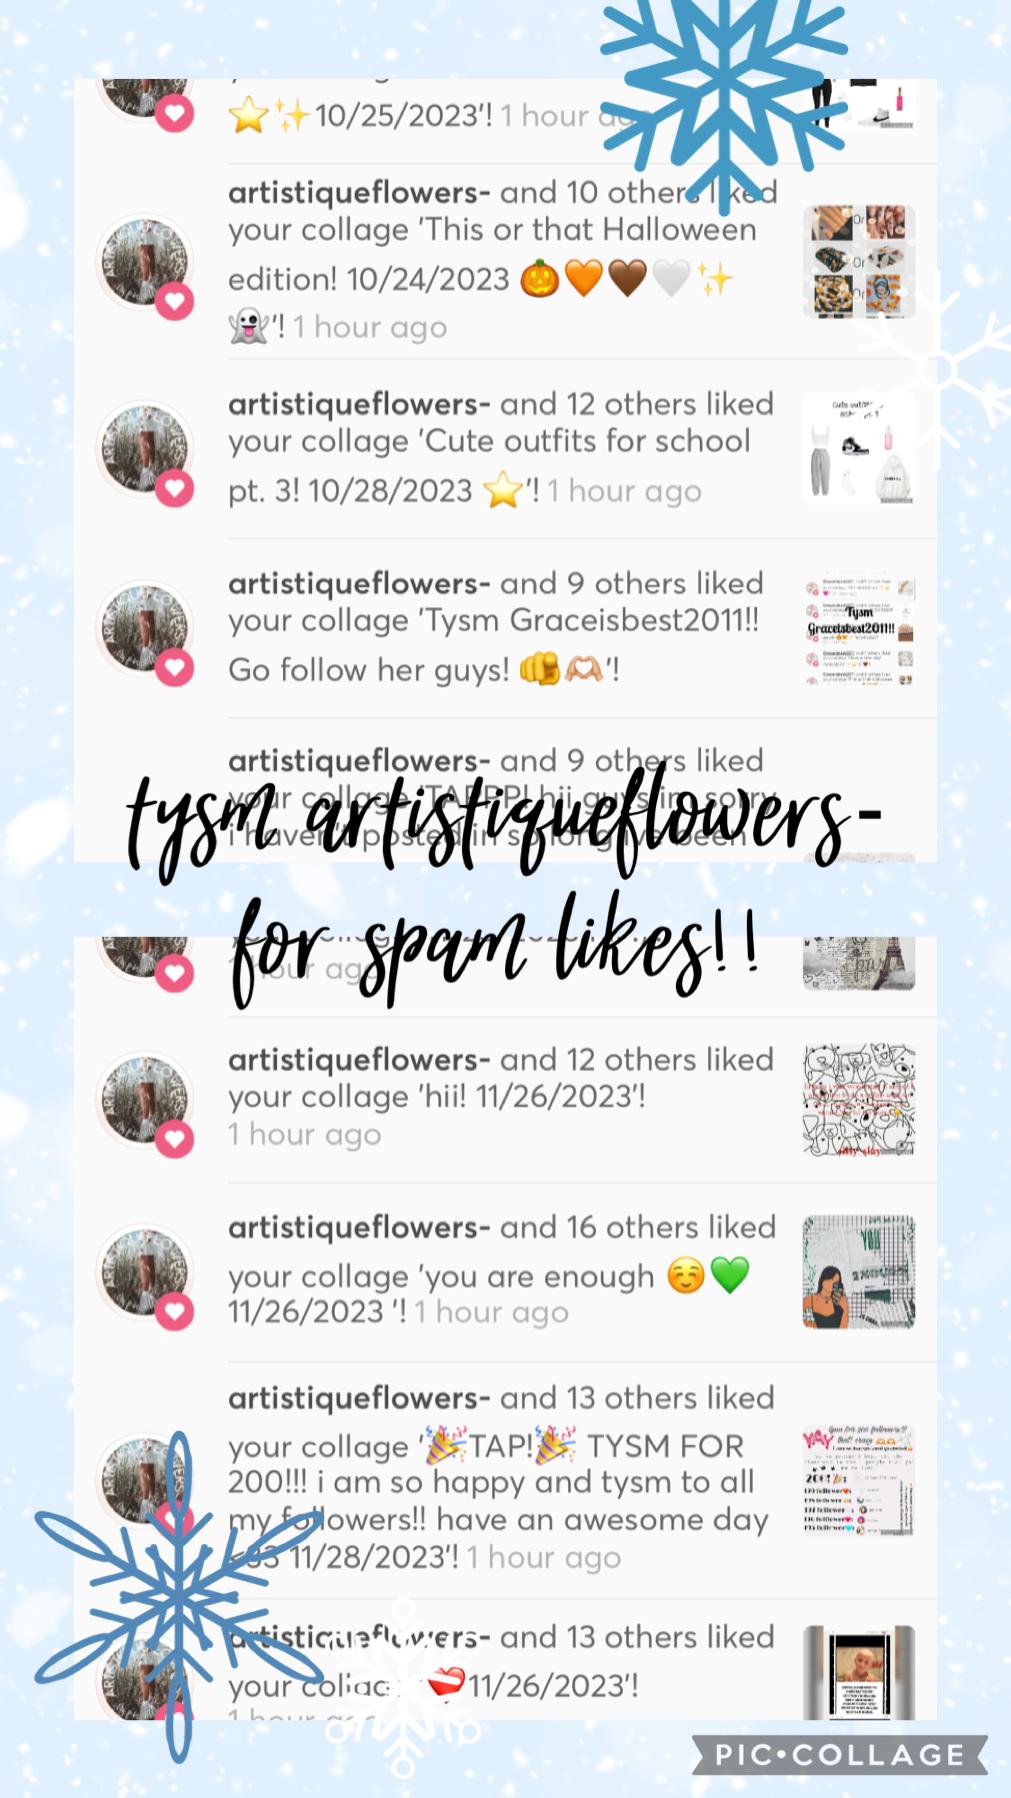 ❄️tap!❄️
tysm artistiqueflowers- for spam likes!! go follow guys ;) 
❄️❄️❄️❄️❄️❄️❄️❄️❄️❄️❄️